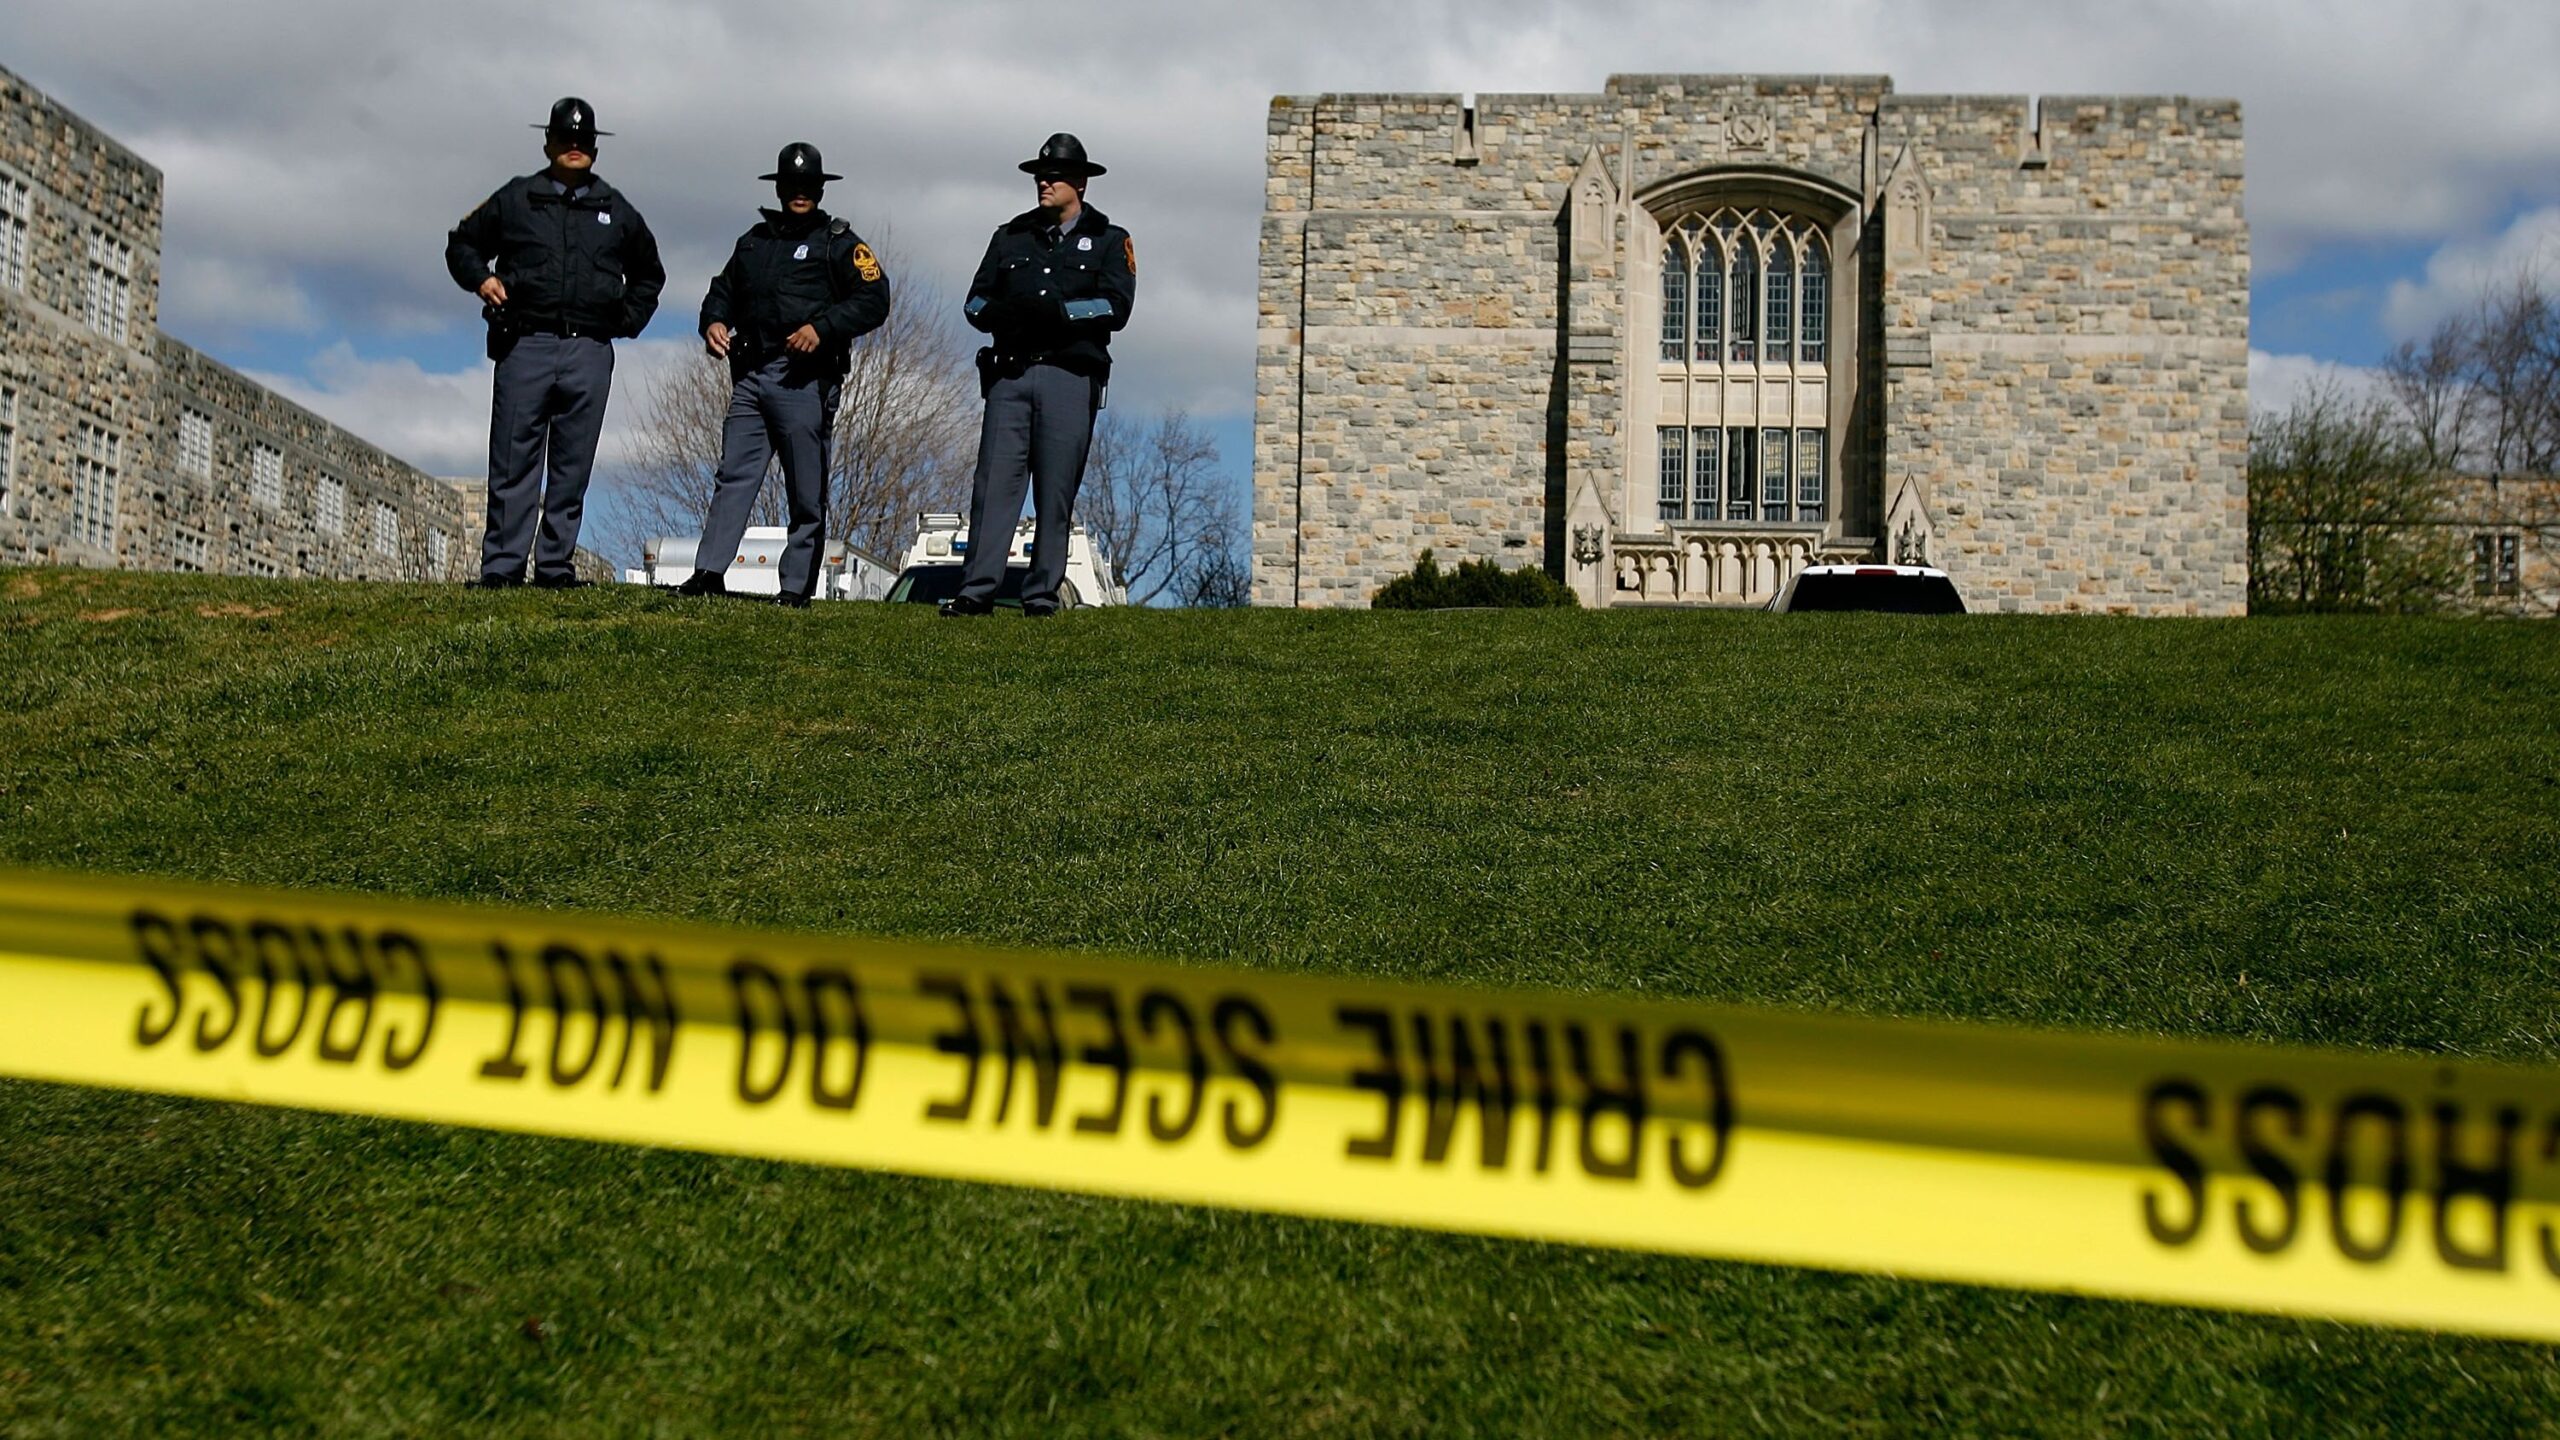 “The Search for Religious Meaning in the VT Shootings”